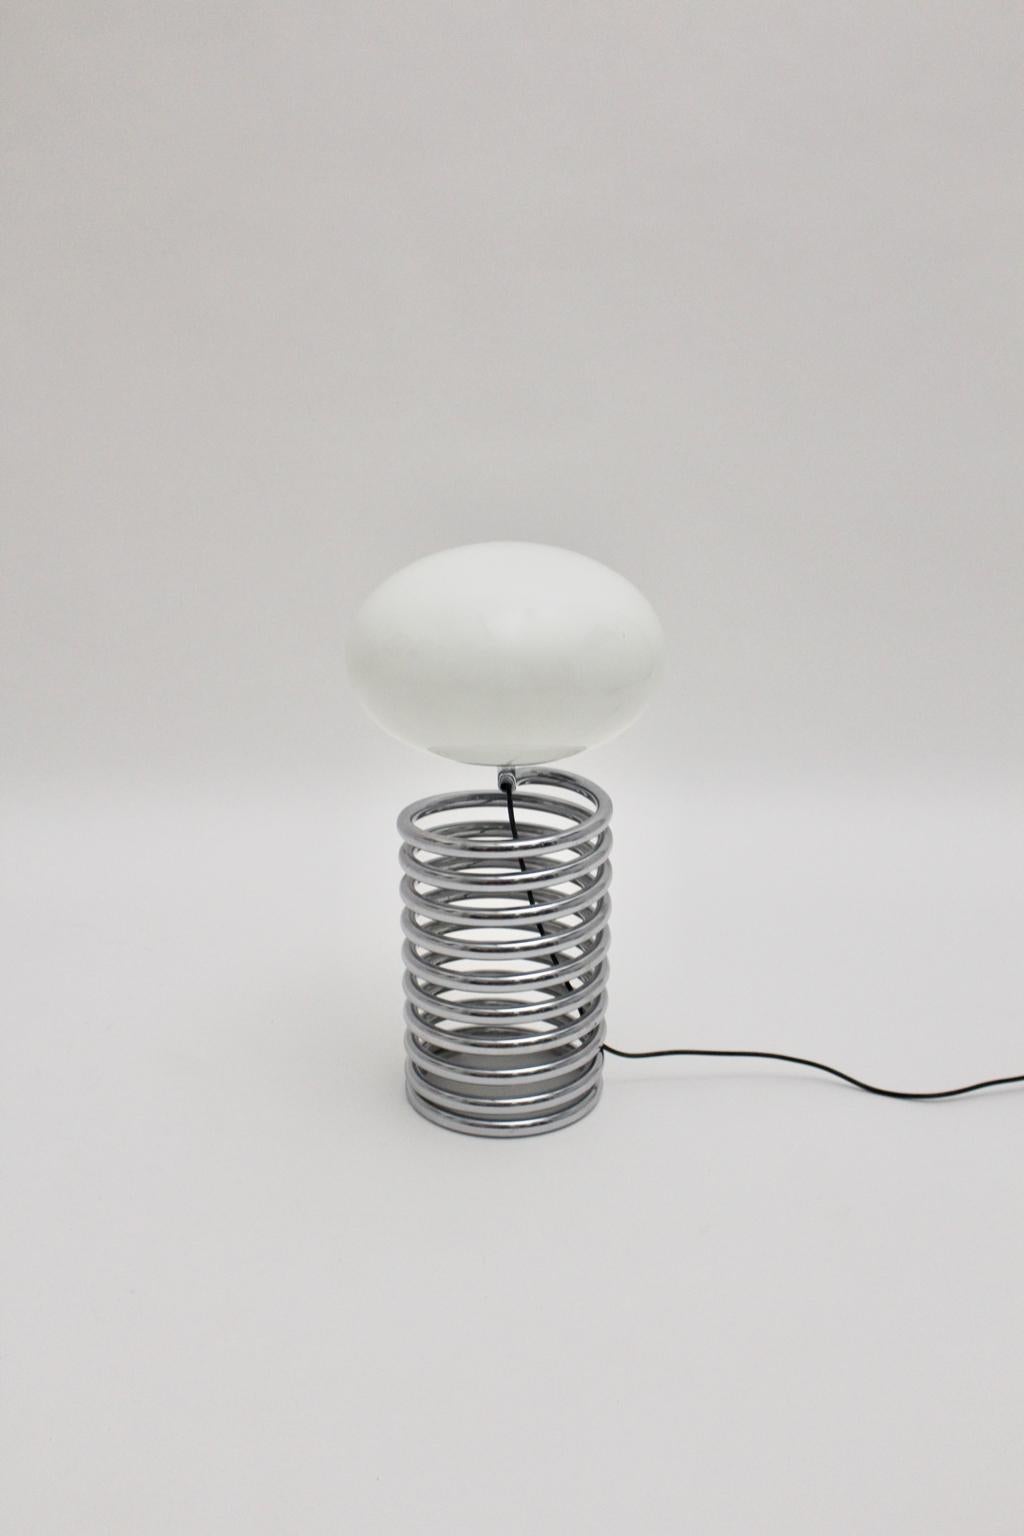 Mid-20th Century Mid-Century Modern Vintage Chromed Glass Table Lamp by Ingo Maurer 1968, Germany For Sale